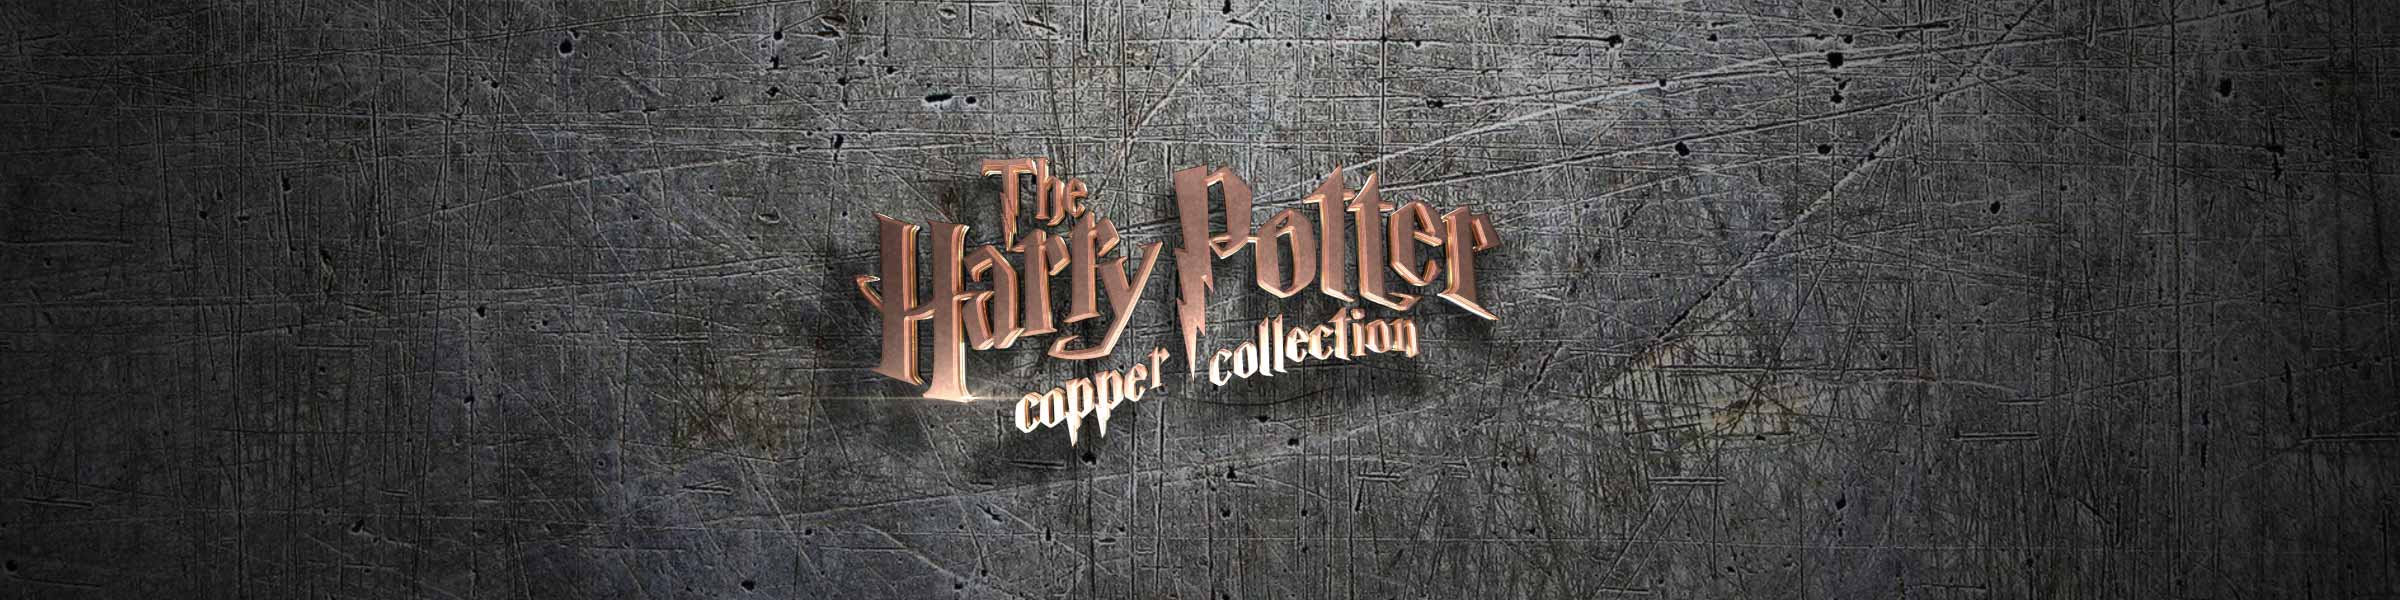 Harry Potter Copper Pin Collection